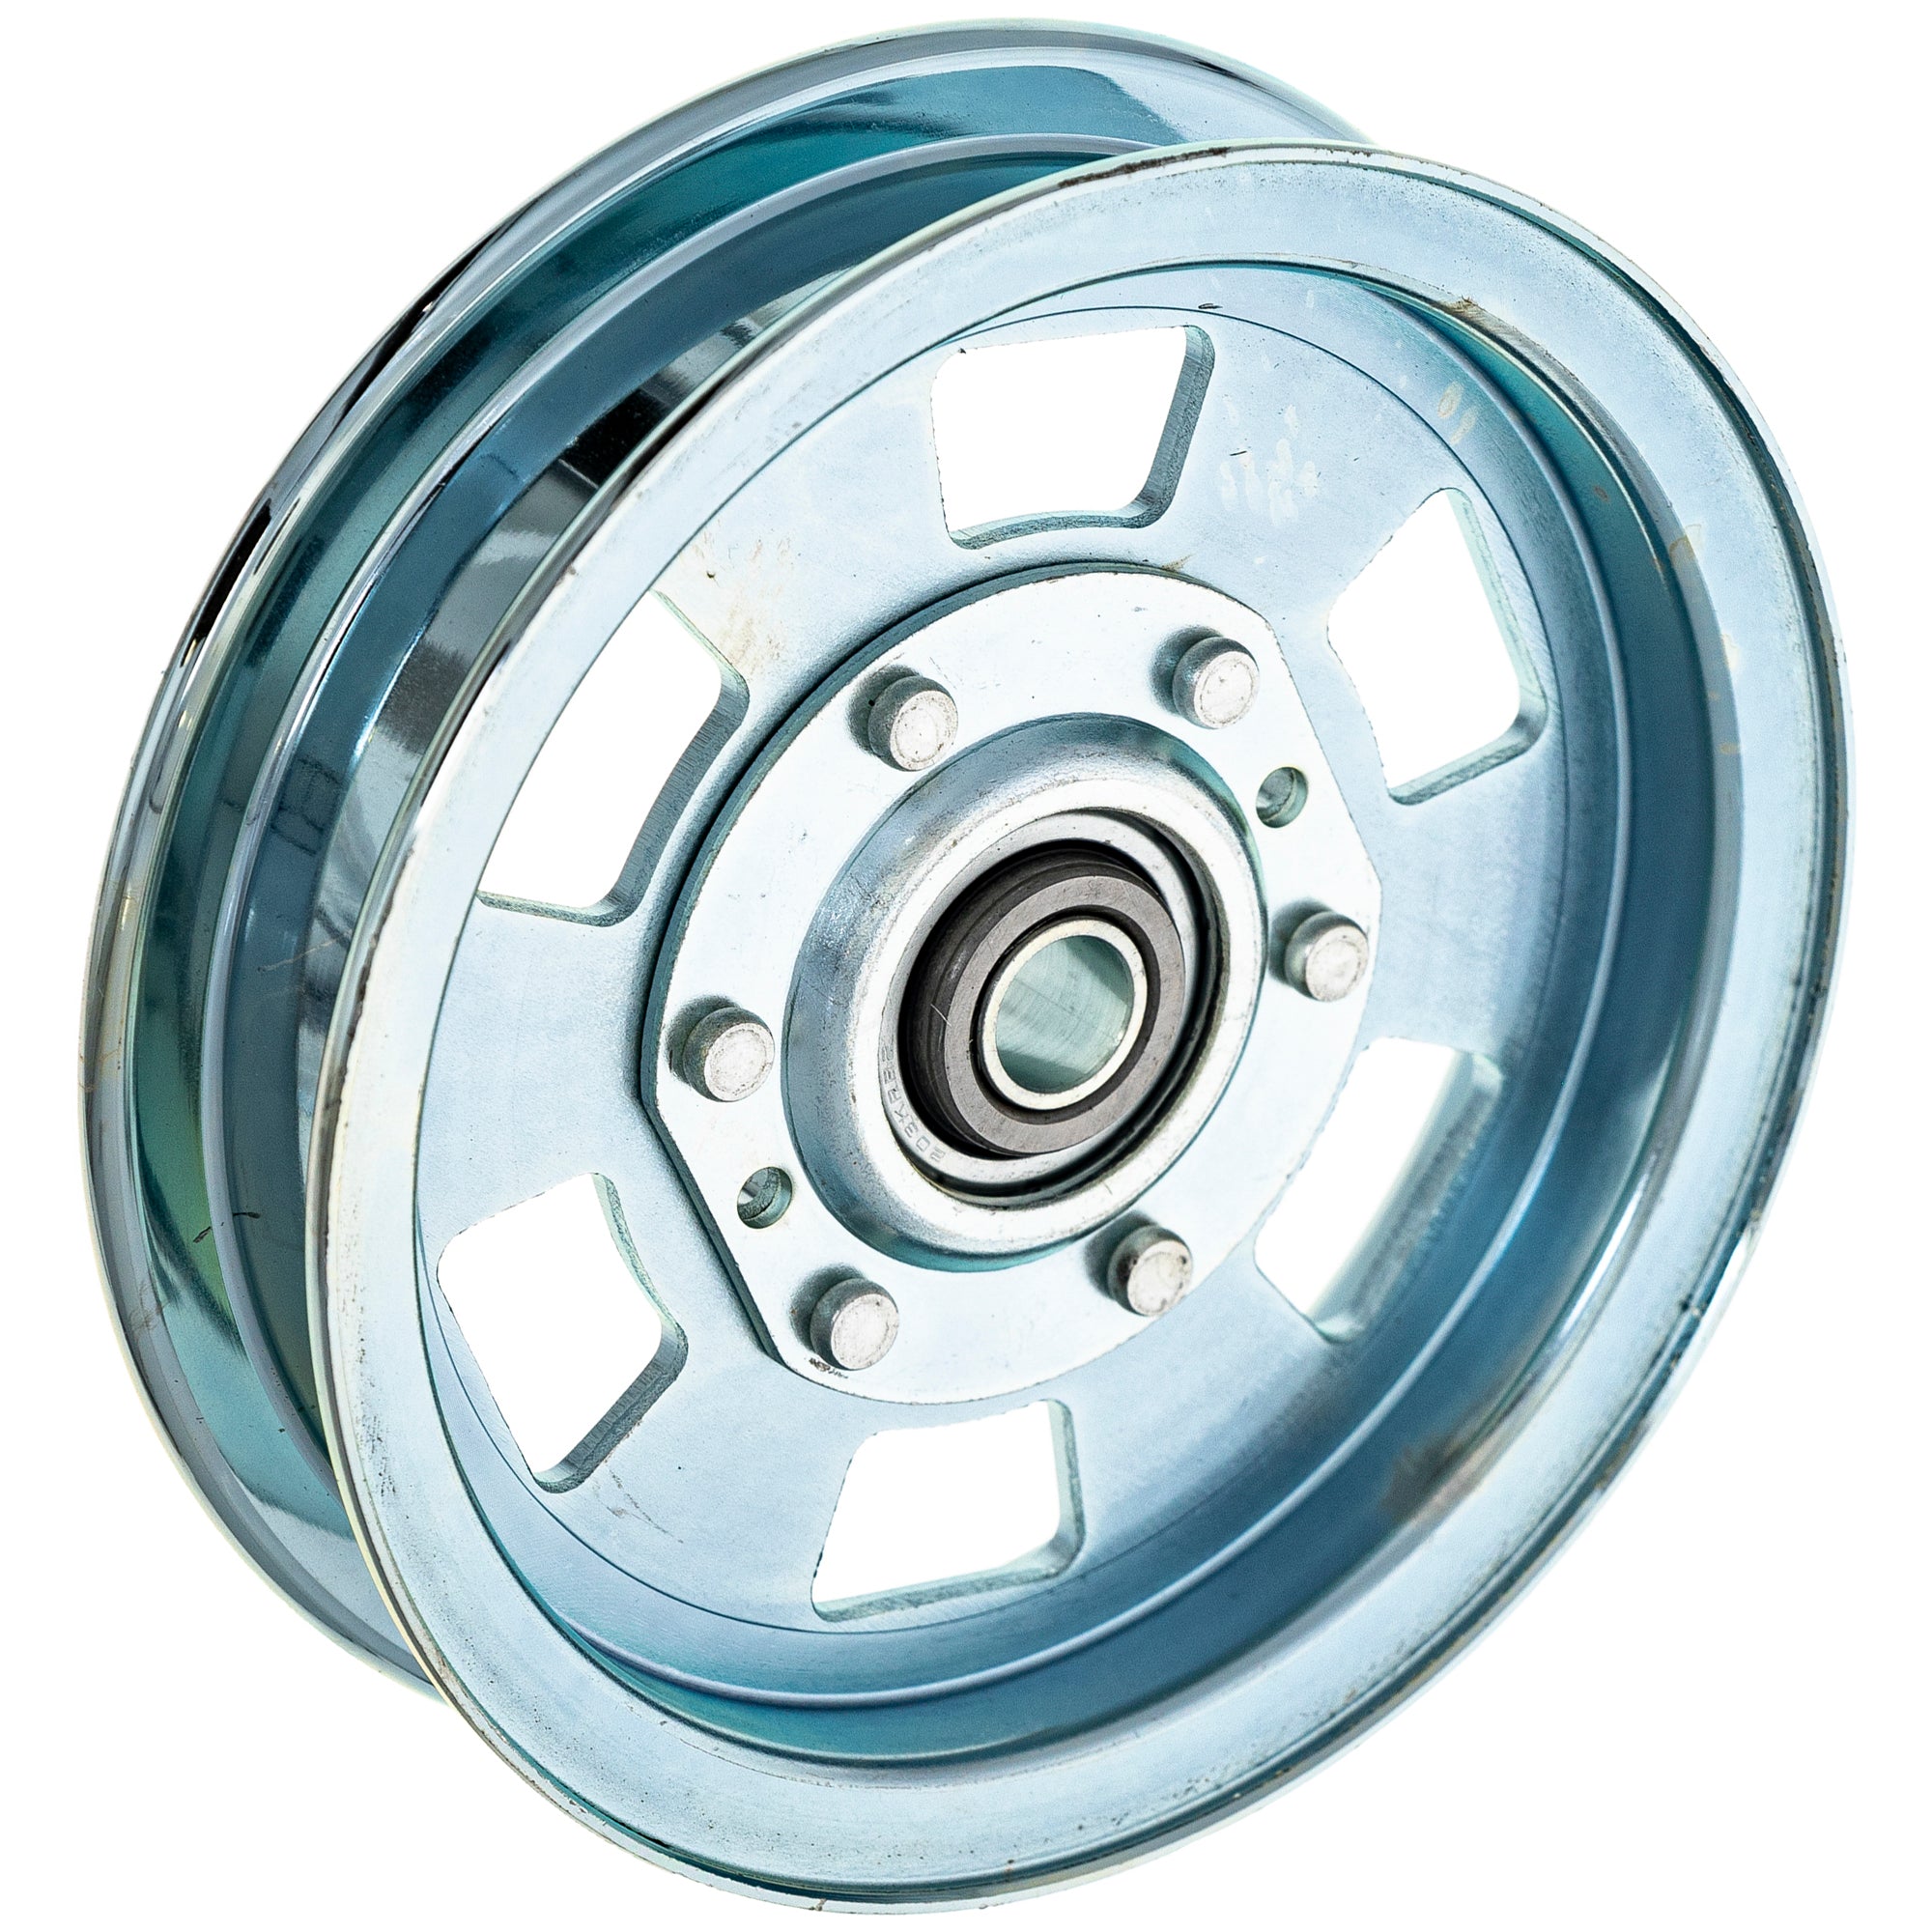 Idler Pulley for Bad Boy CZT MZ  033-7201-00 033-7201-25 033-8000-00 2 Pack